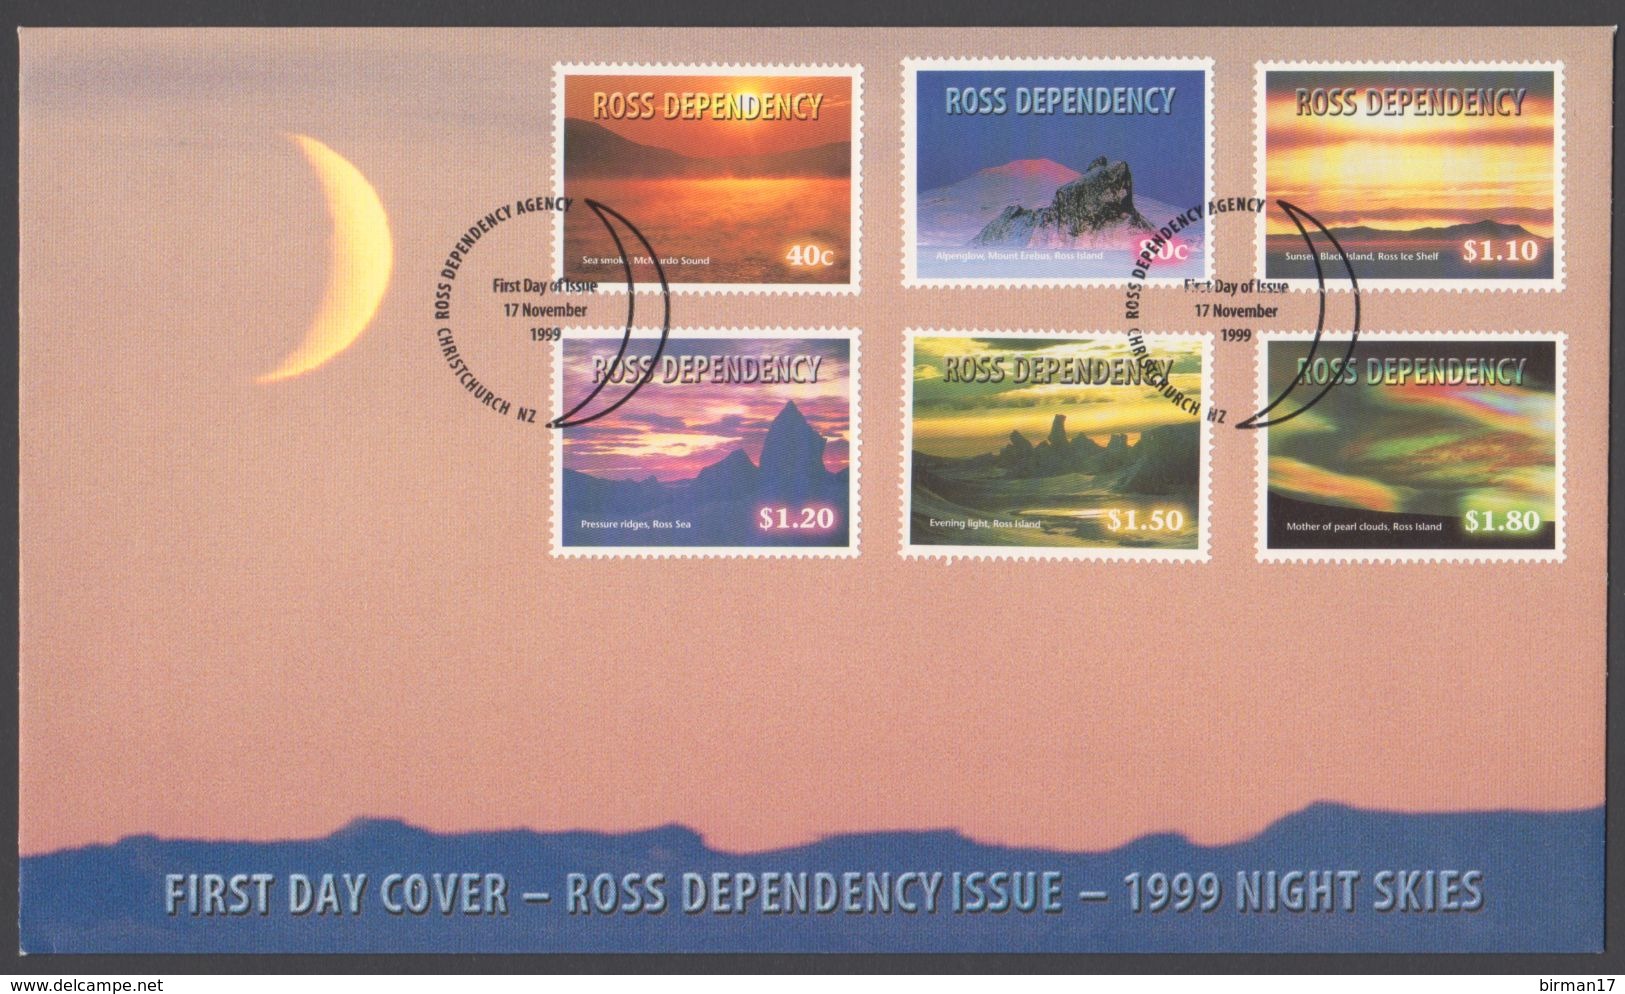 ROSS DEPENDENCY 1999 FDC Night Skies - FDC